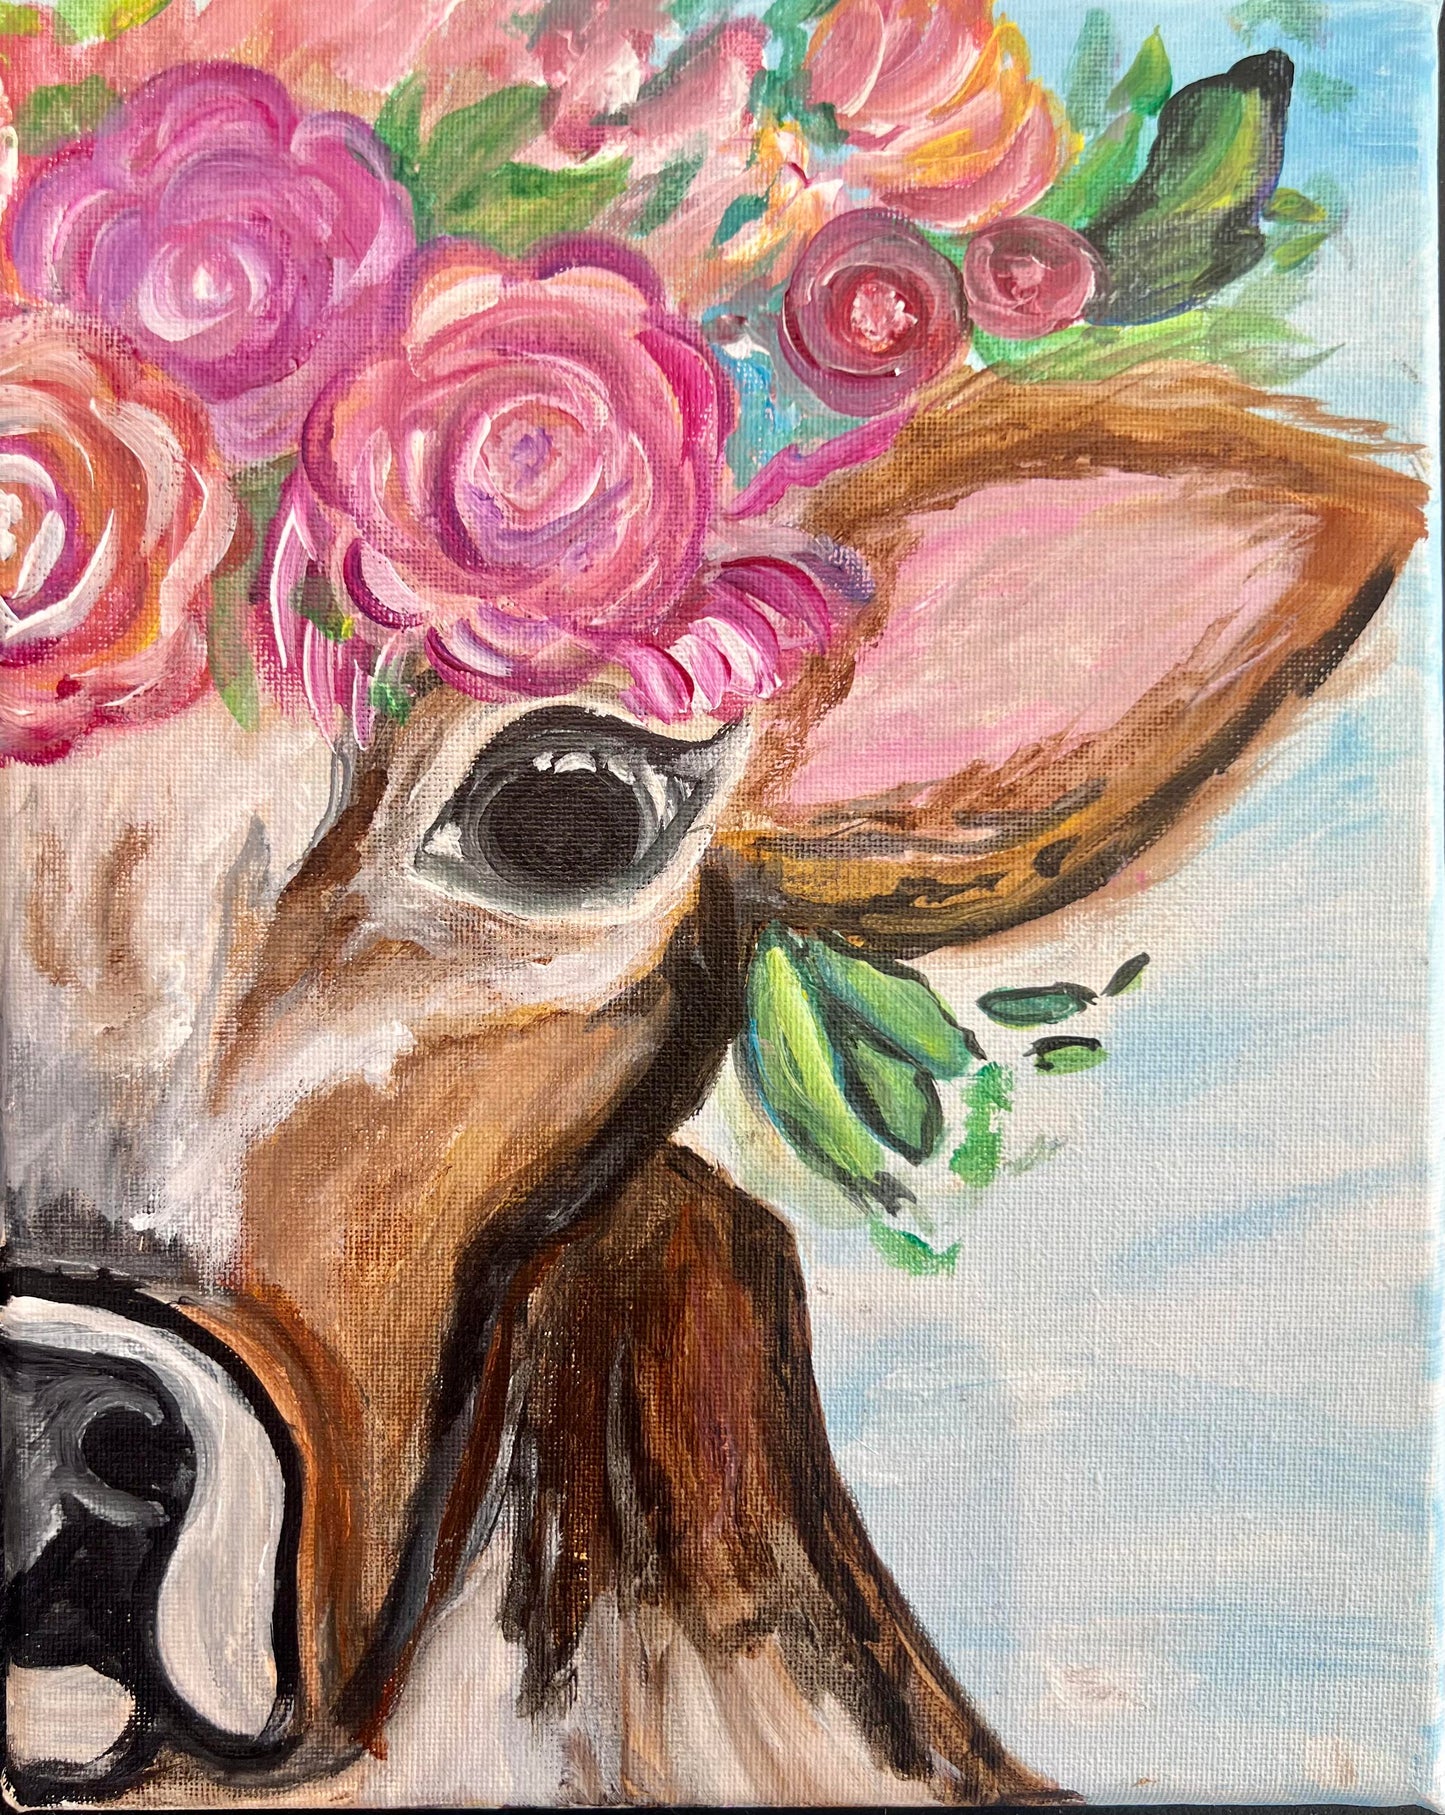 Cow with Flower Crown (small canvas)